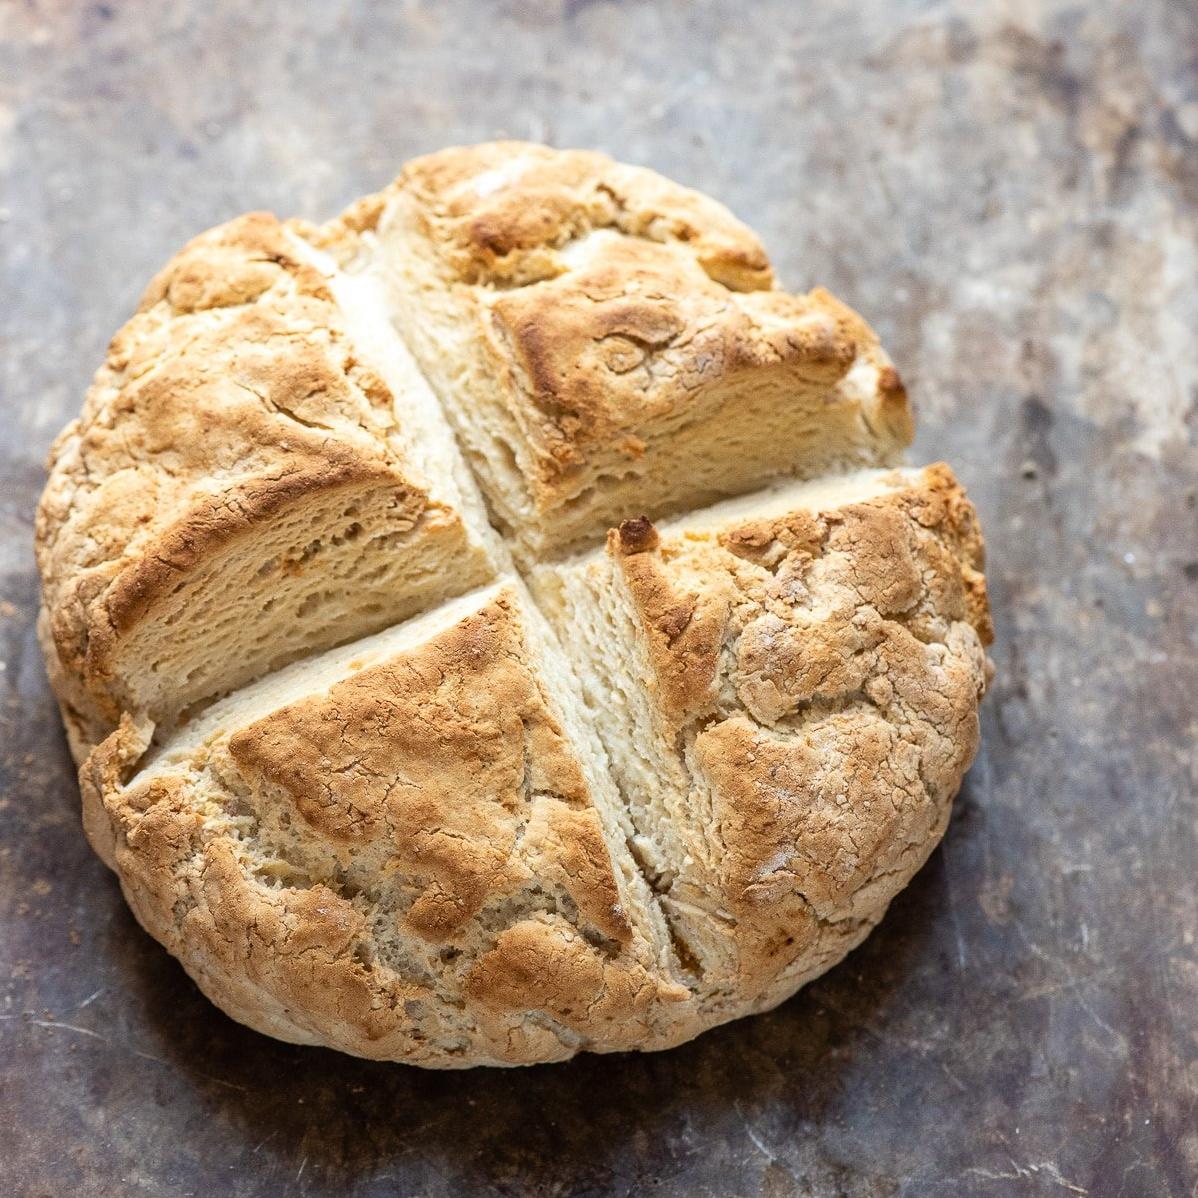  No yeast? No problem! This bread uses baking soda to rise instead.